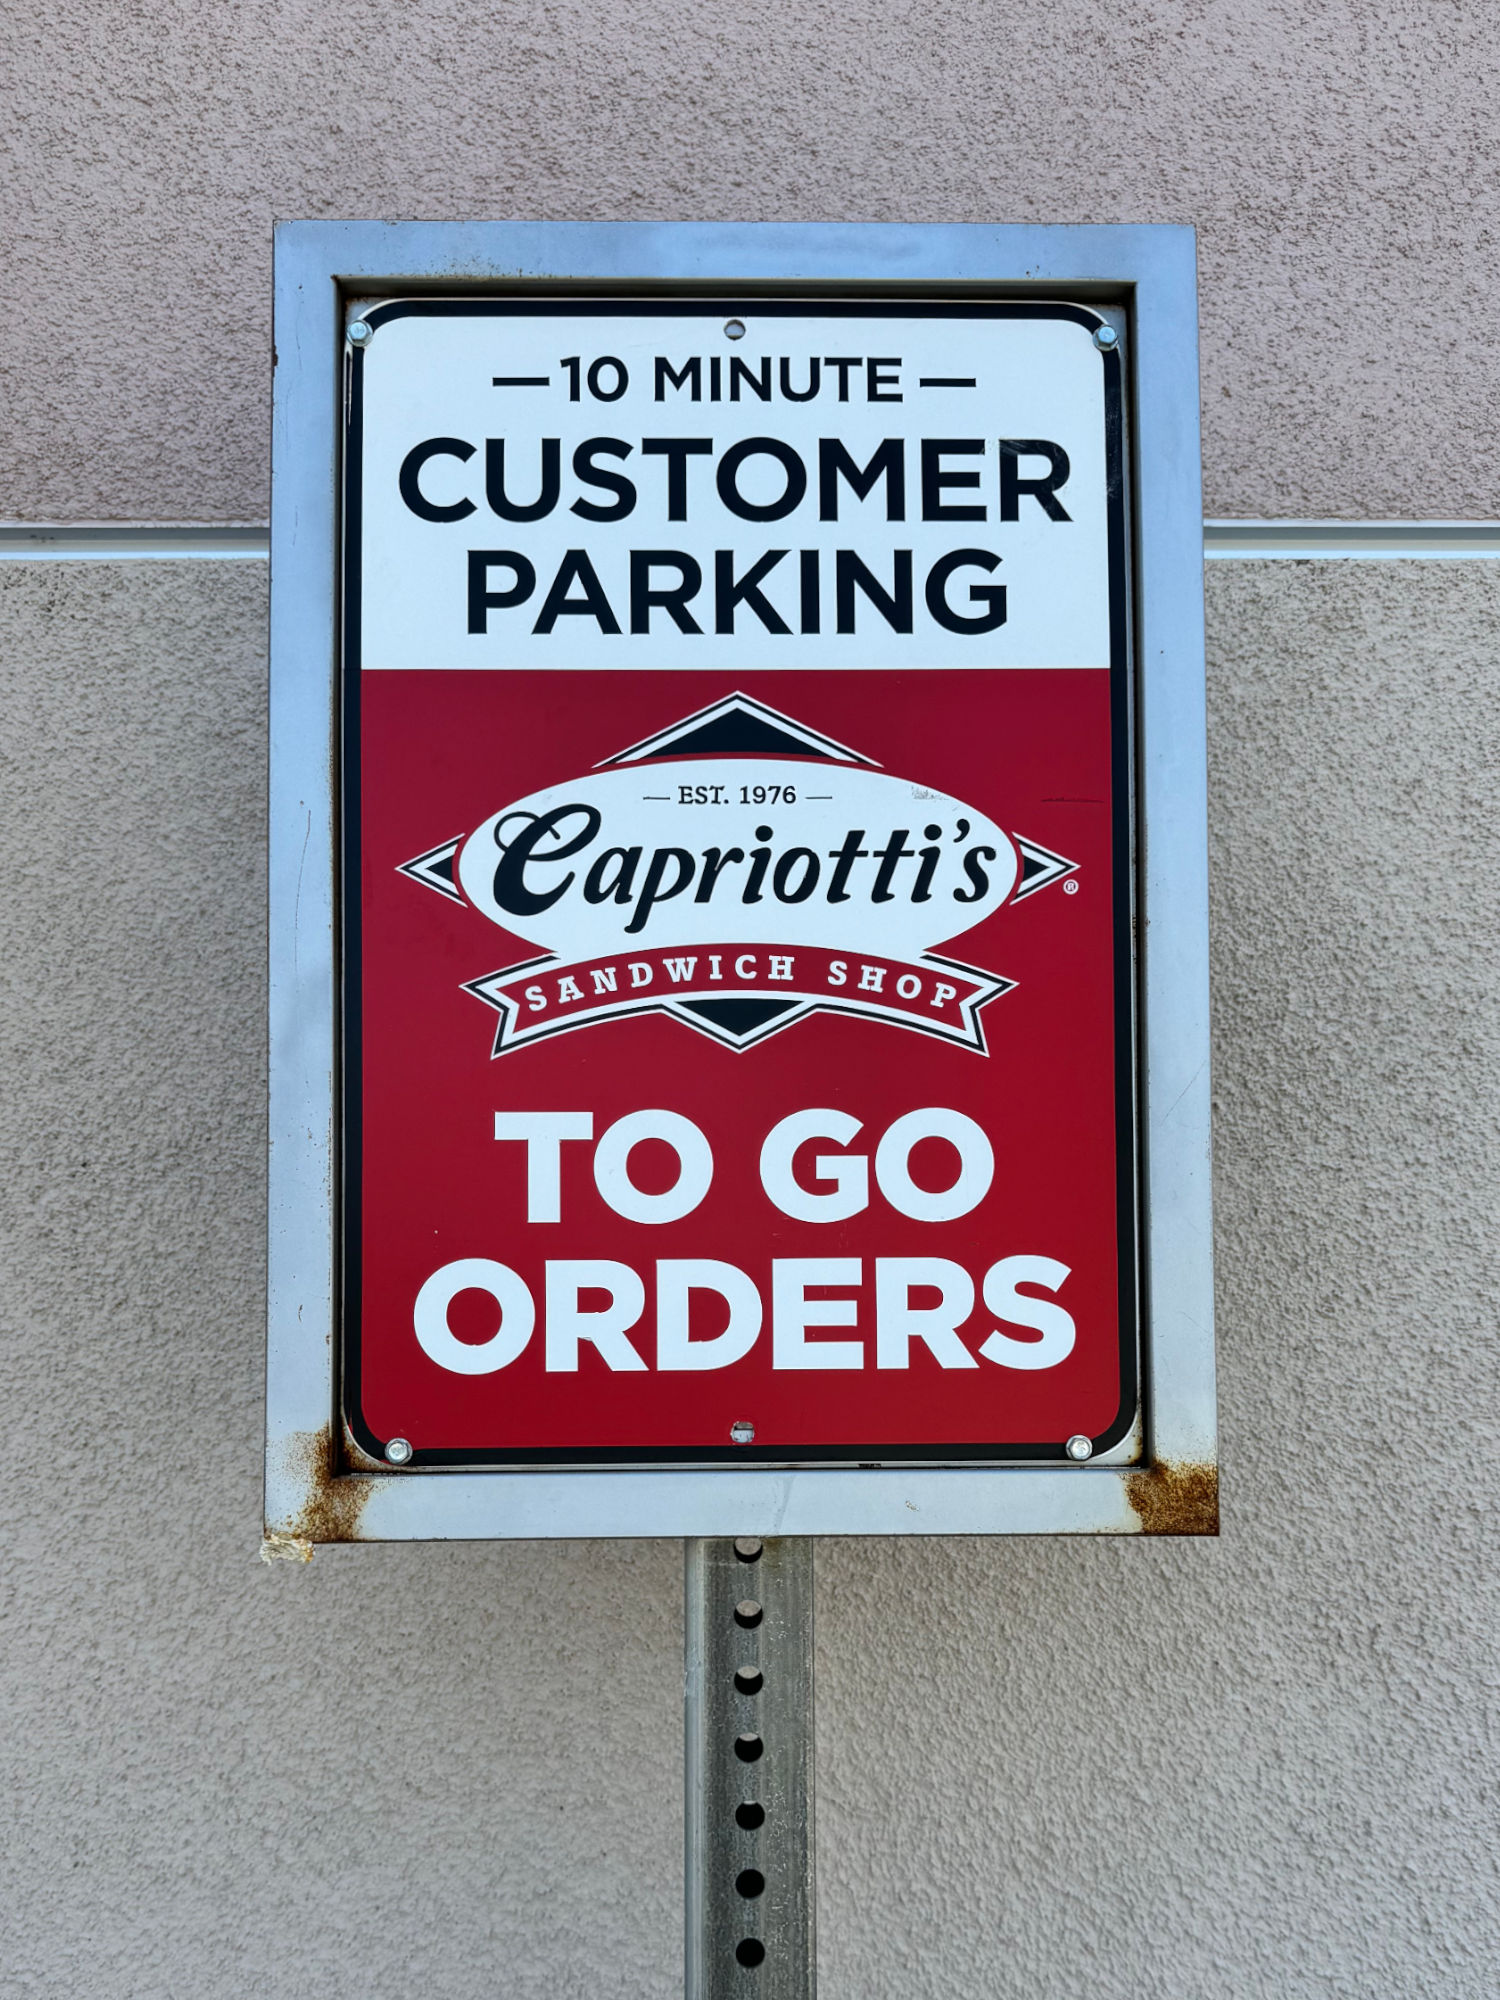 Capriotti's To Go Orders